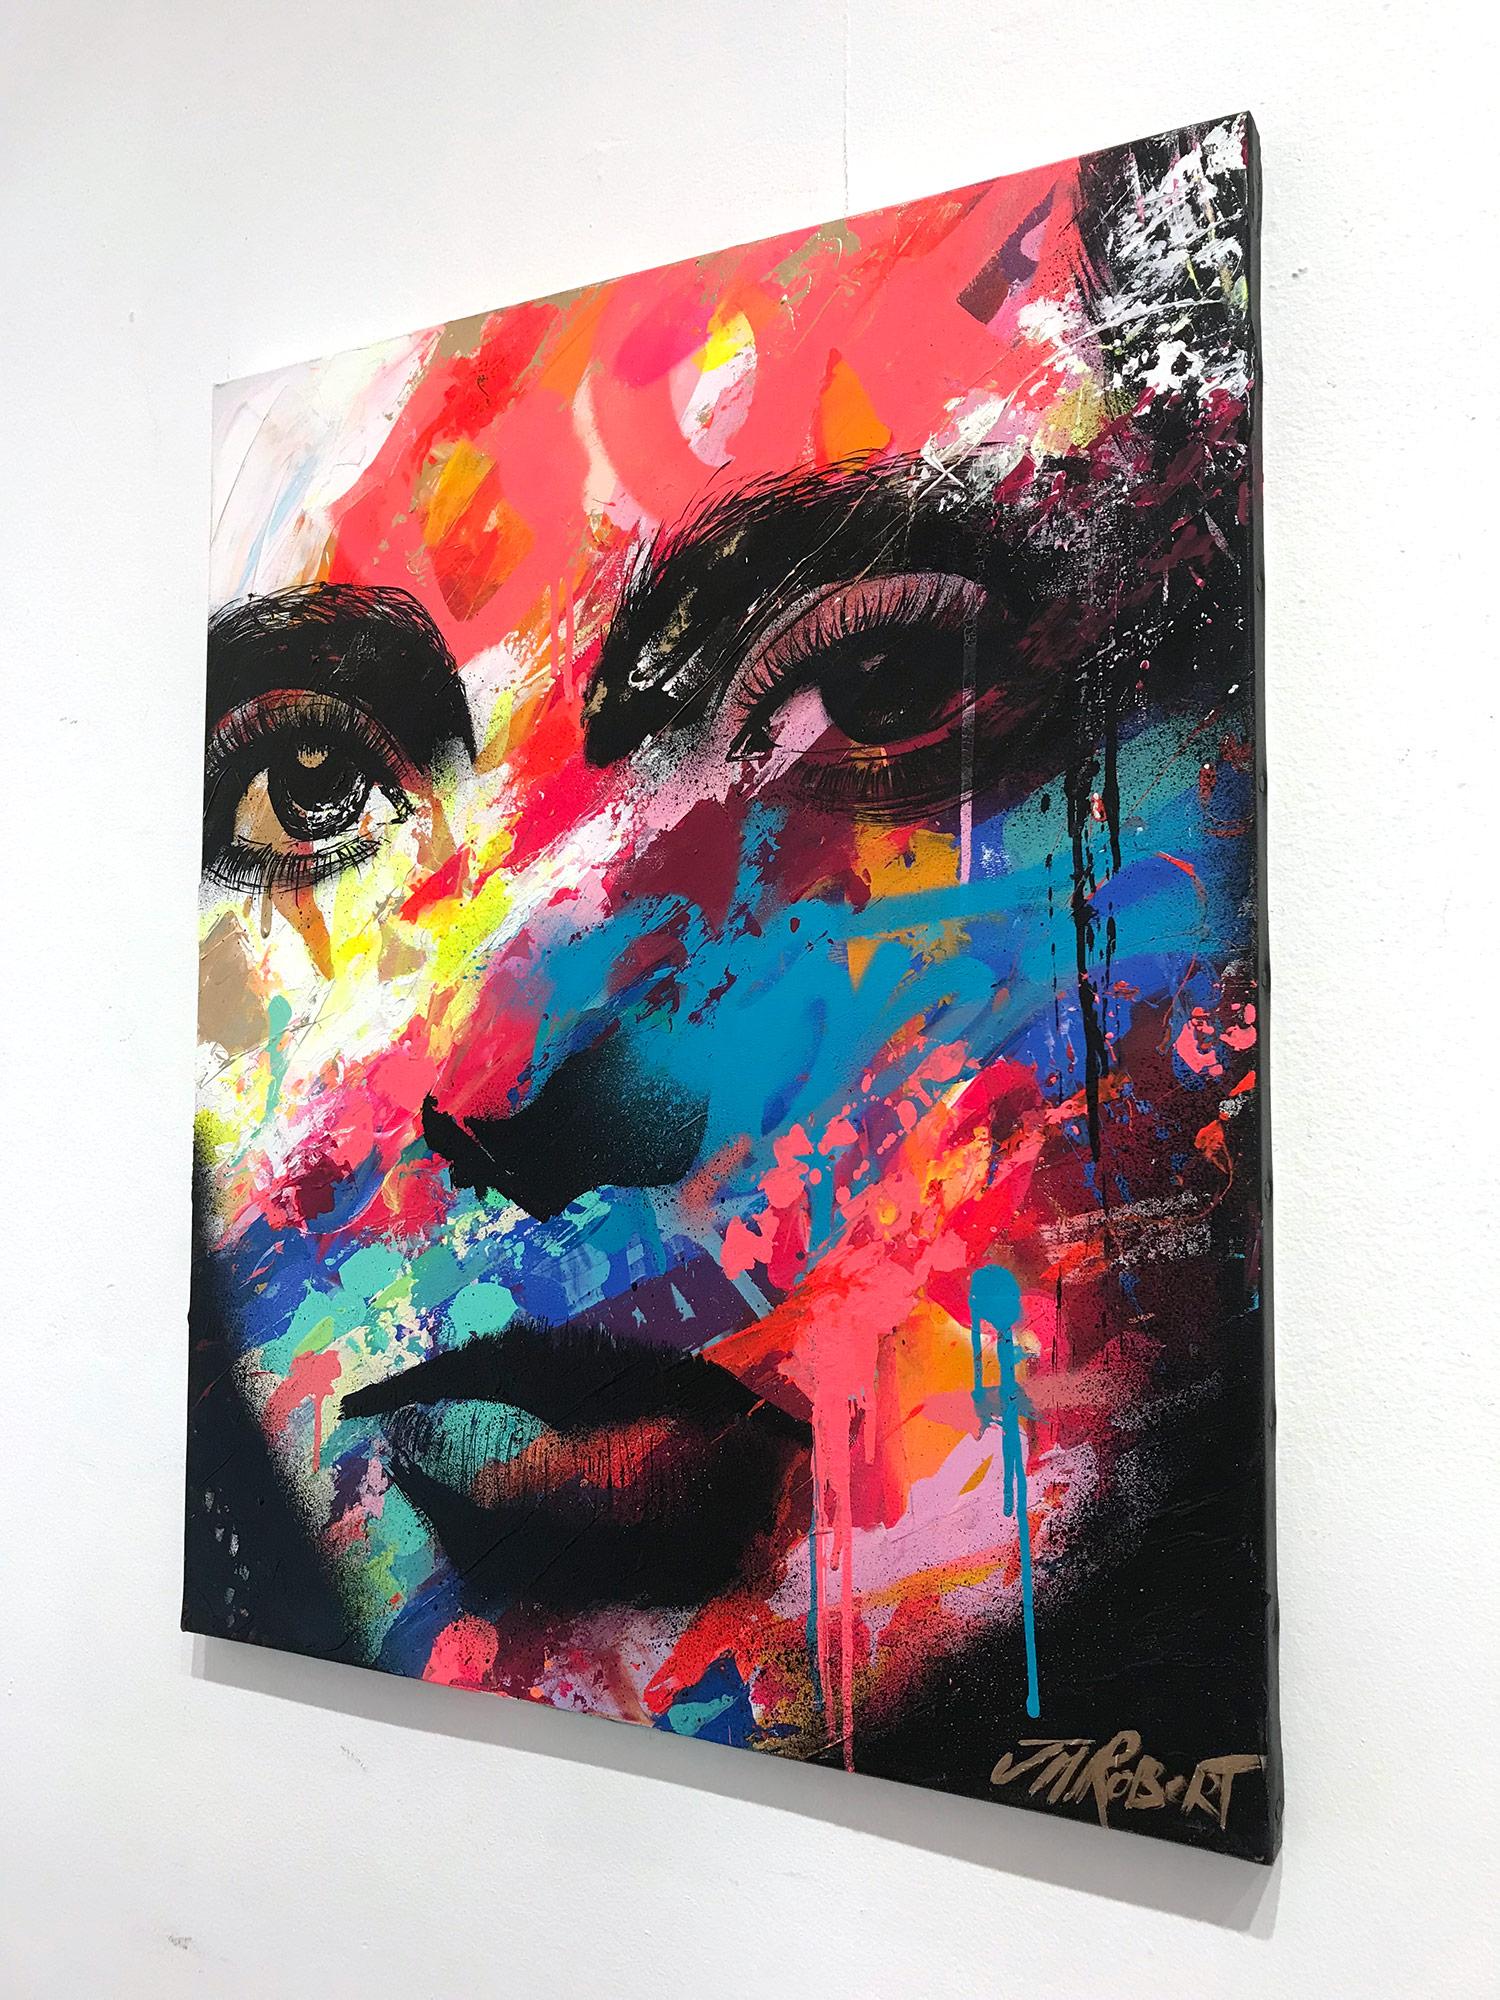 “Elle Fait Face” She Faces, Colorful, Abstract Street Art, French Artist 5